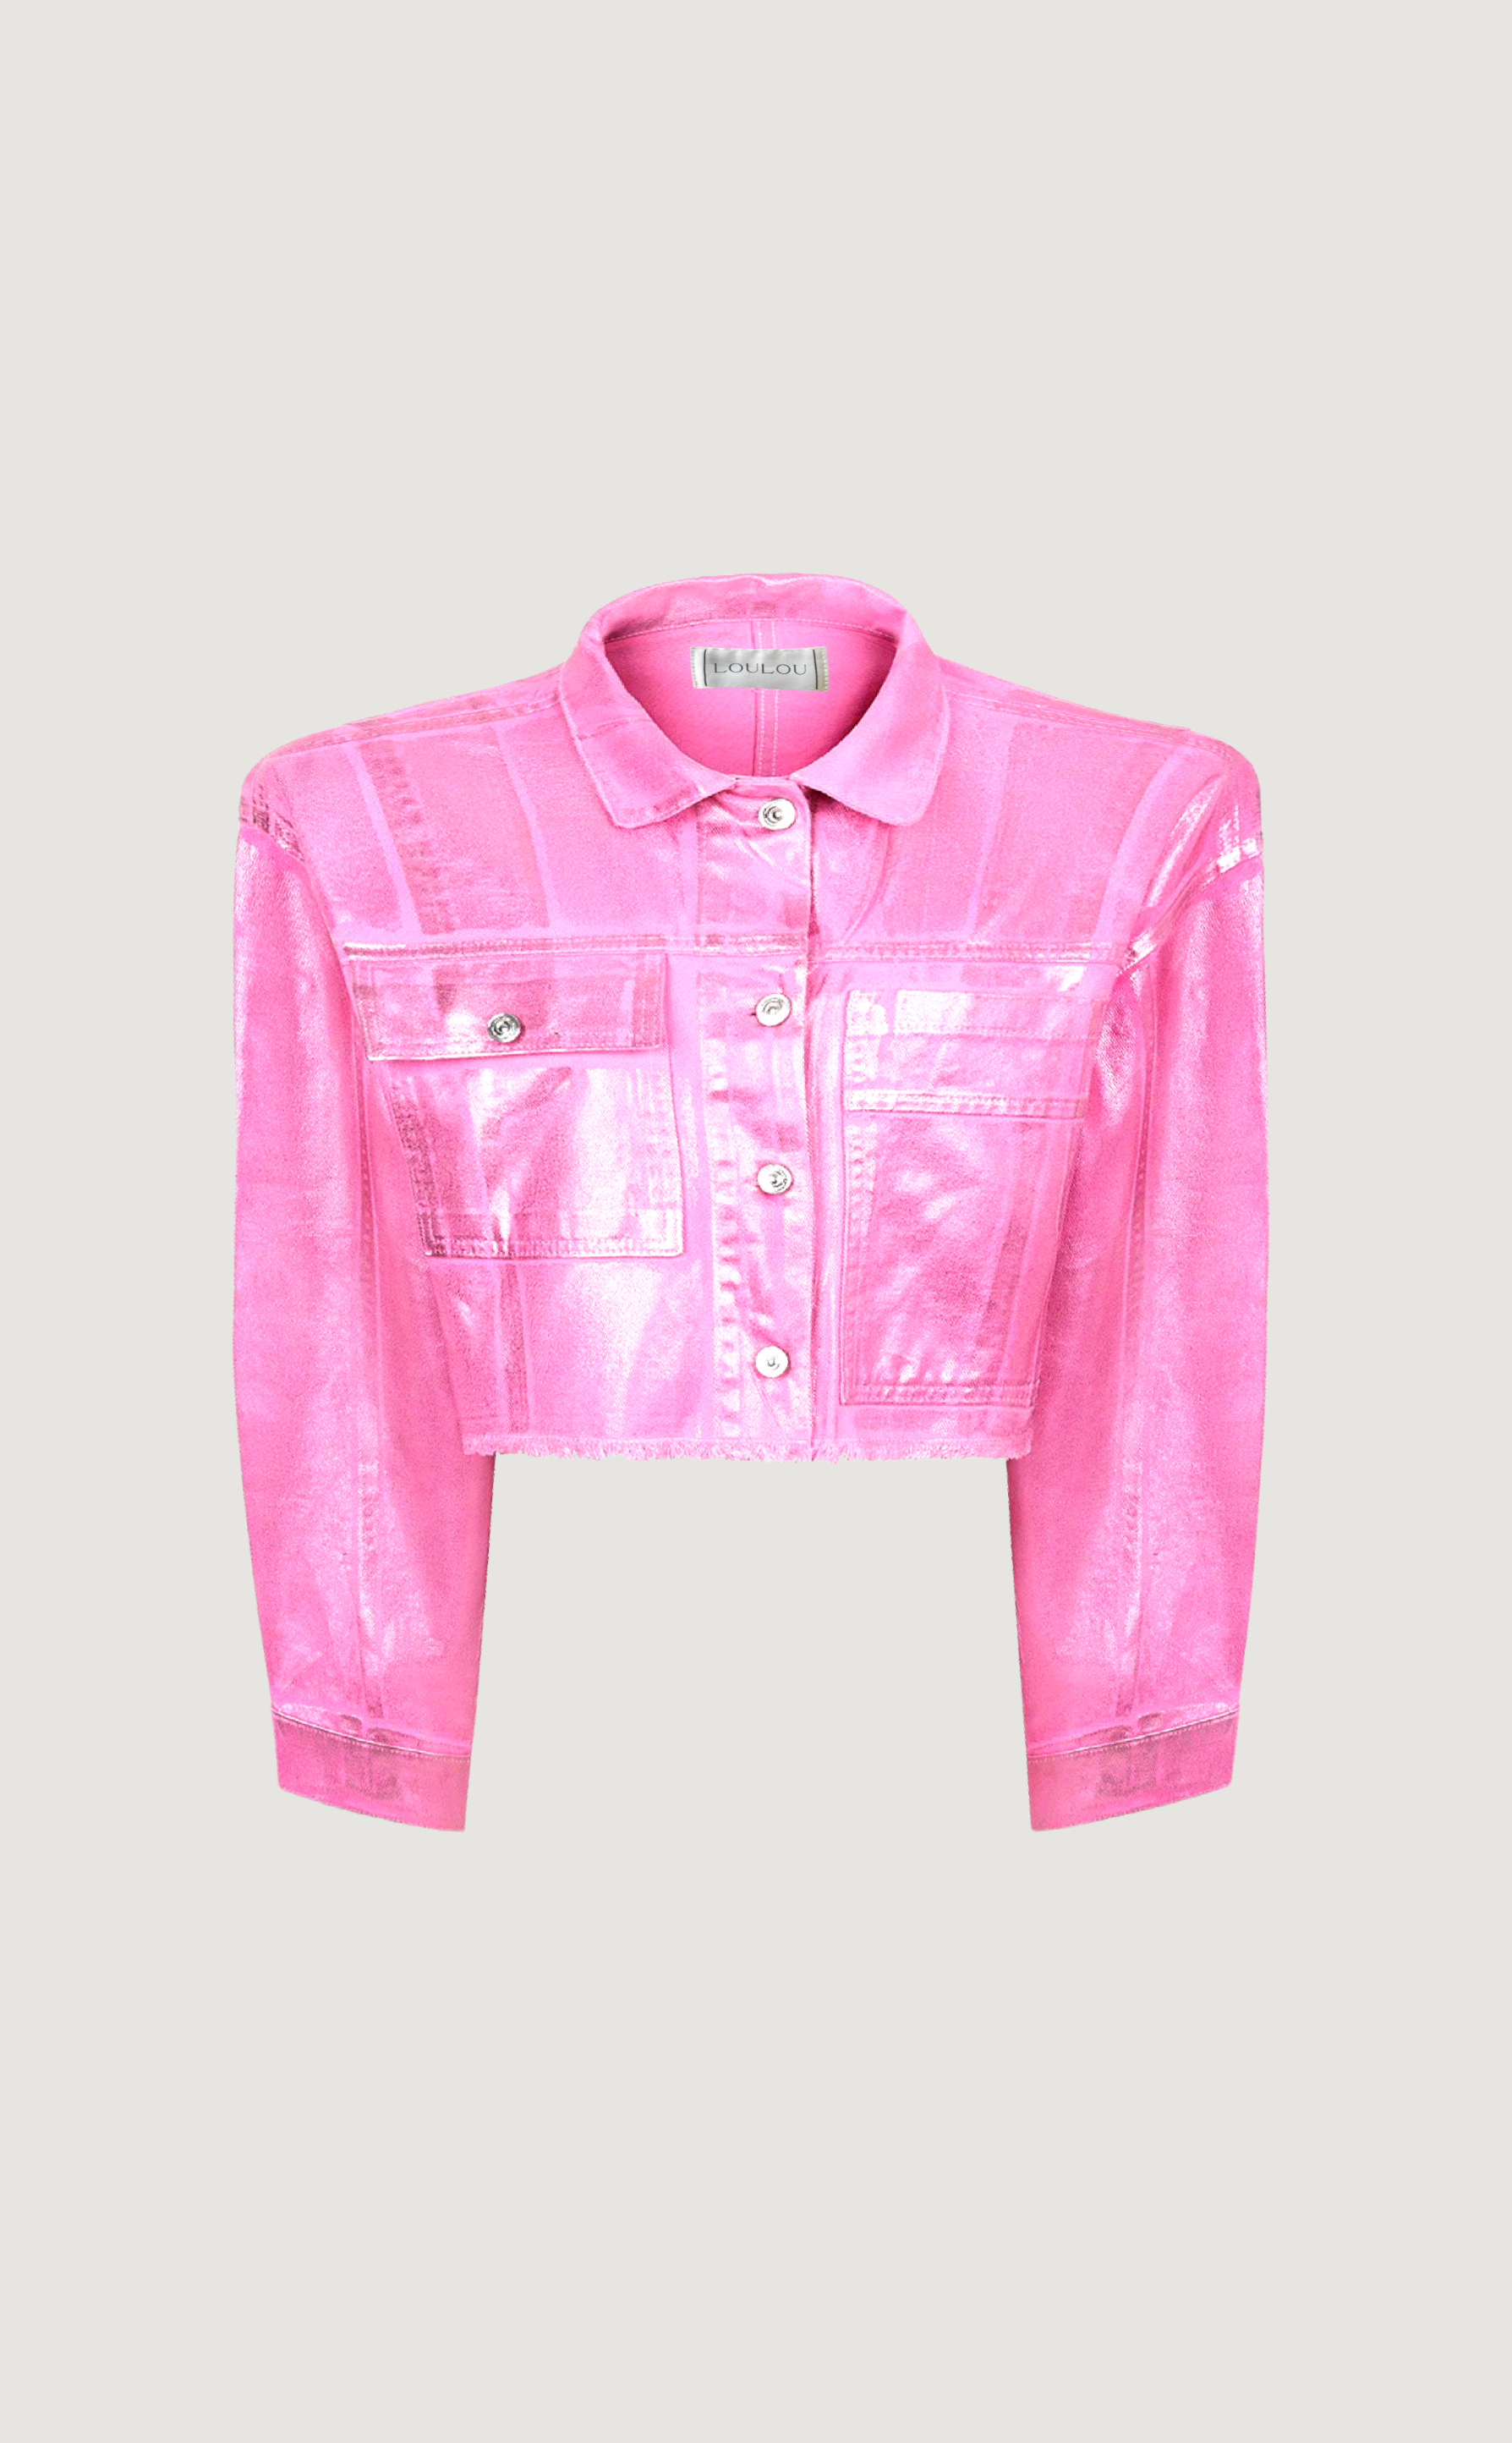 A Place in the Sun metallic denim jacket in pink